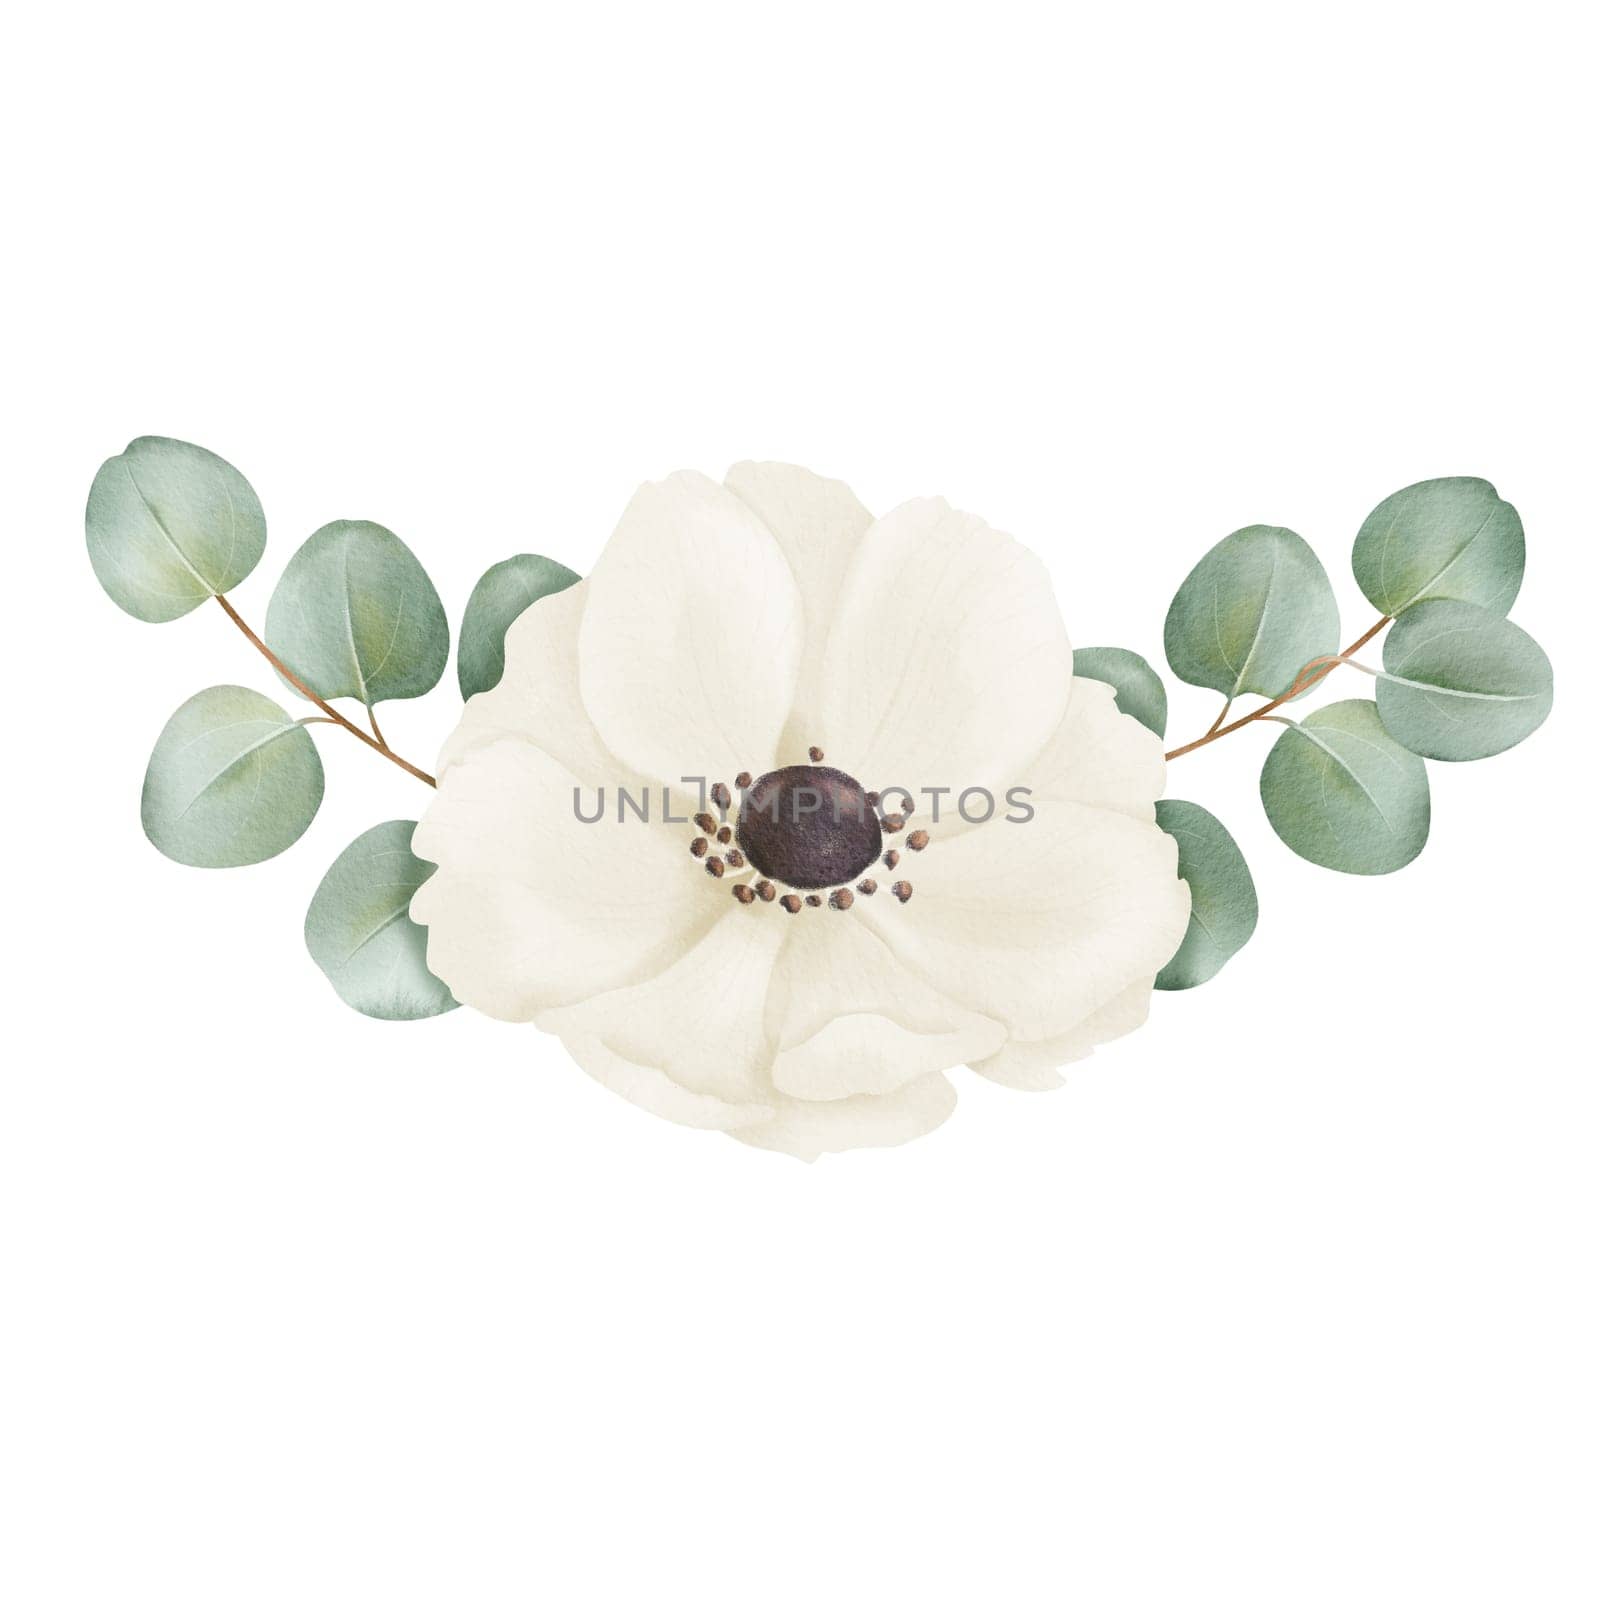 A composition white anemone flowers accompanied by eucalyptus leaves, in a watercolor. for design applications, wedding invitations, floral-themed stationery digital backgrounds or decorative prints.